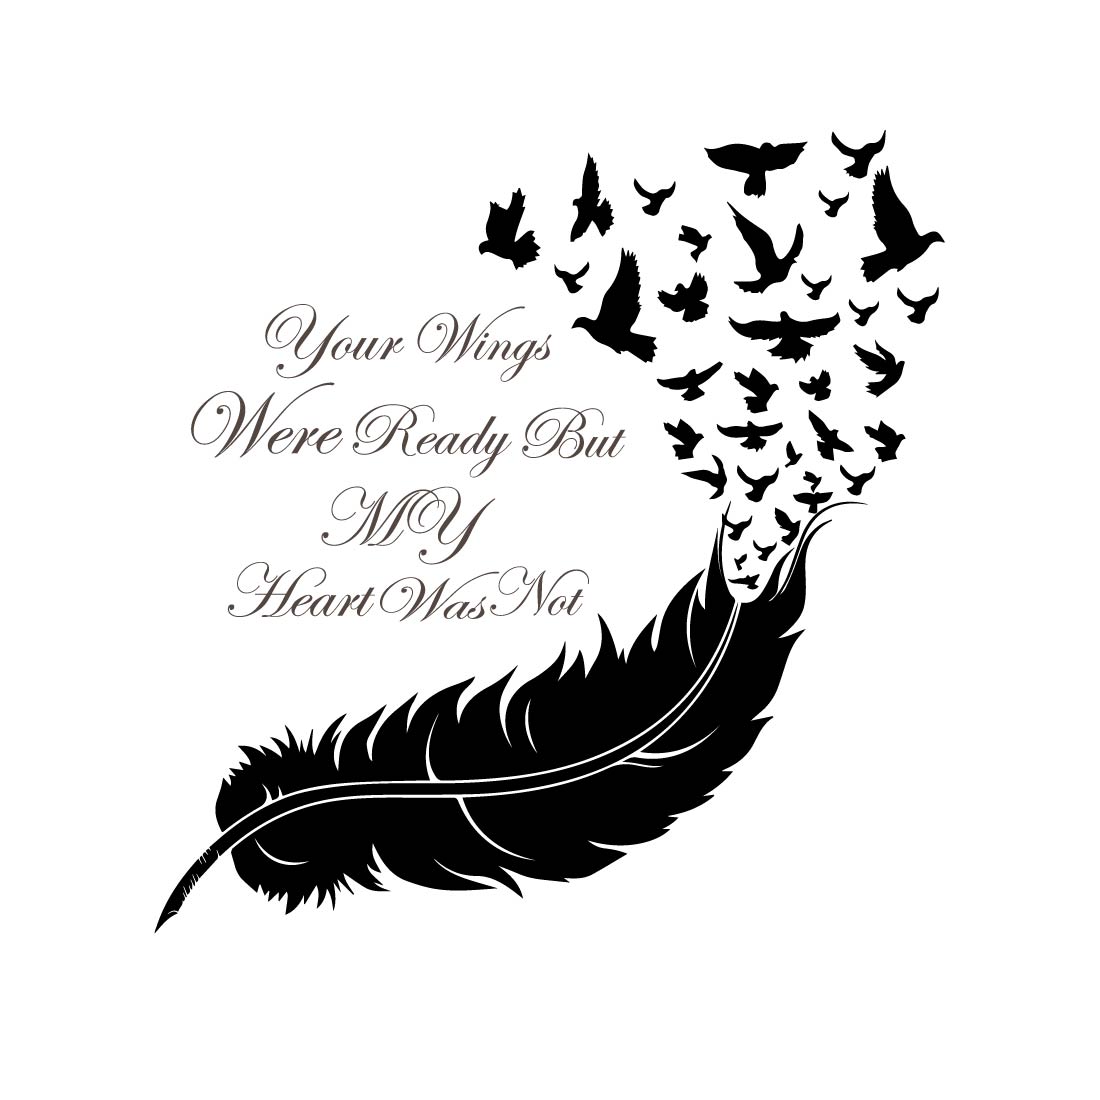 Feather svg bundle, Feather birds svg, dxf, png, jpg, Feathers Silhouette, Boho feather svg, Tribal feather svg, Instant Download cover image.